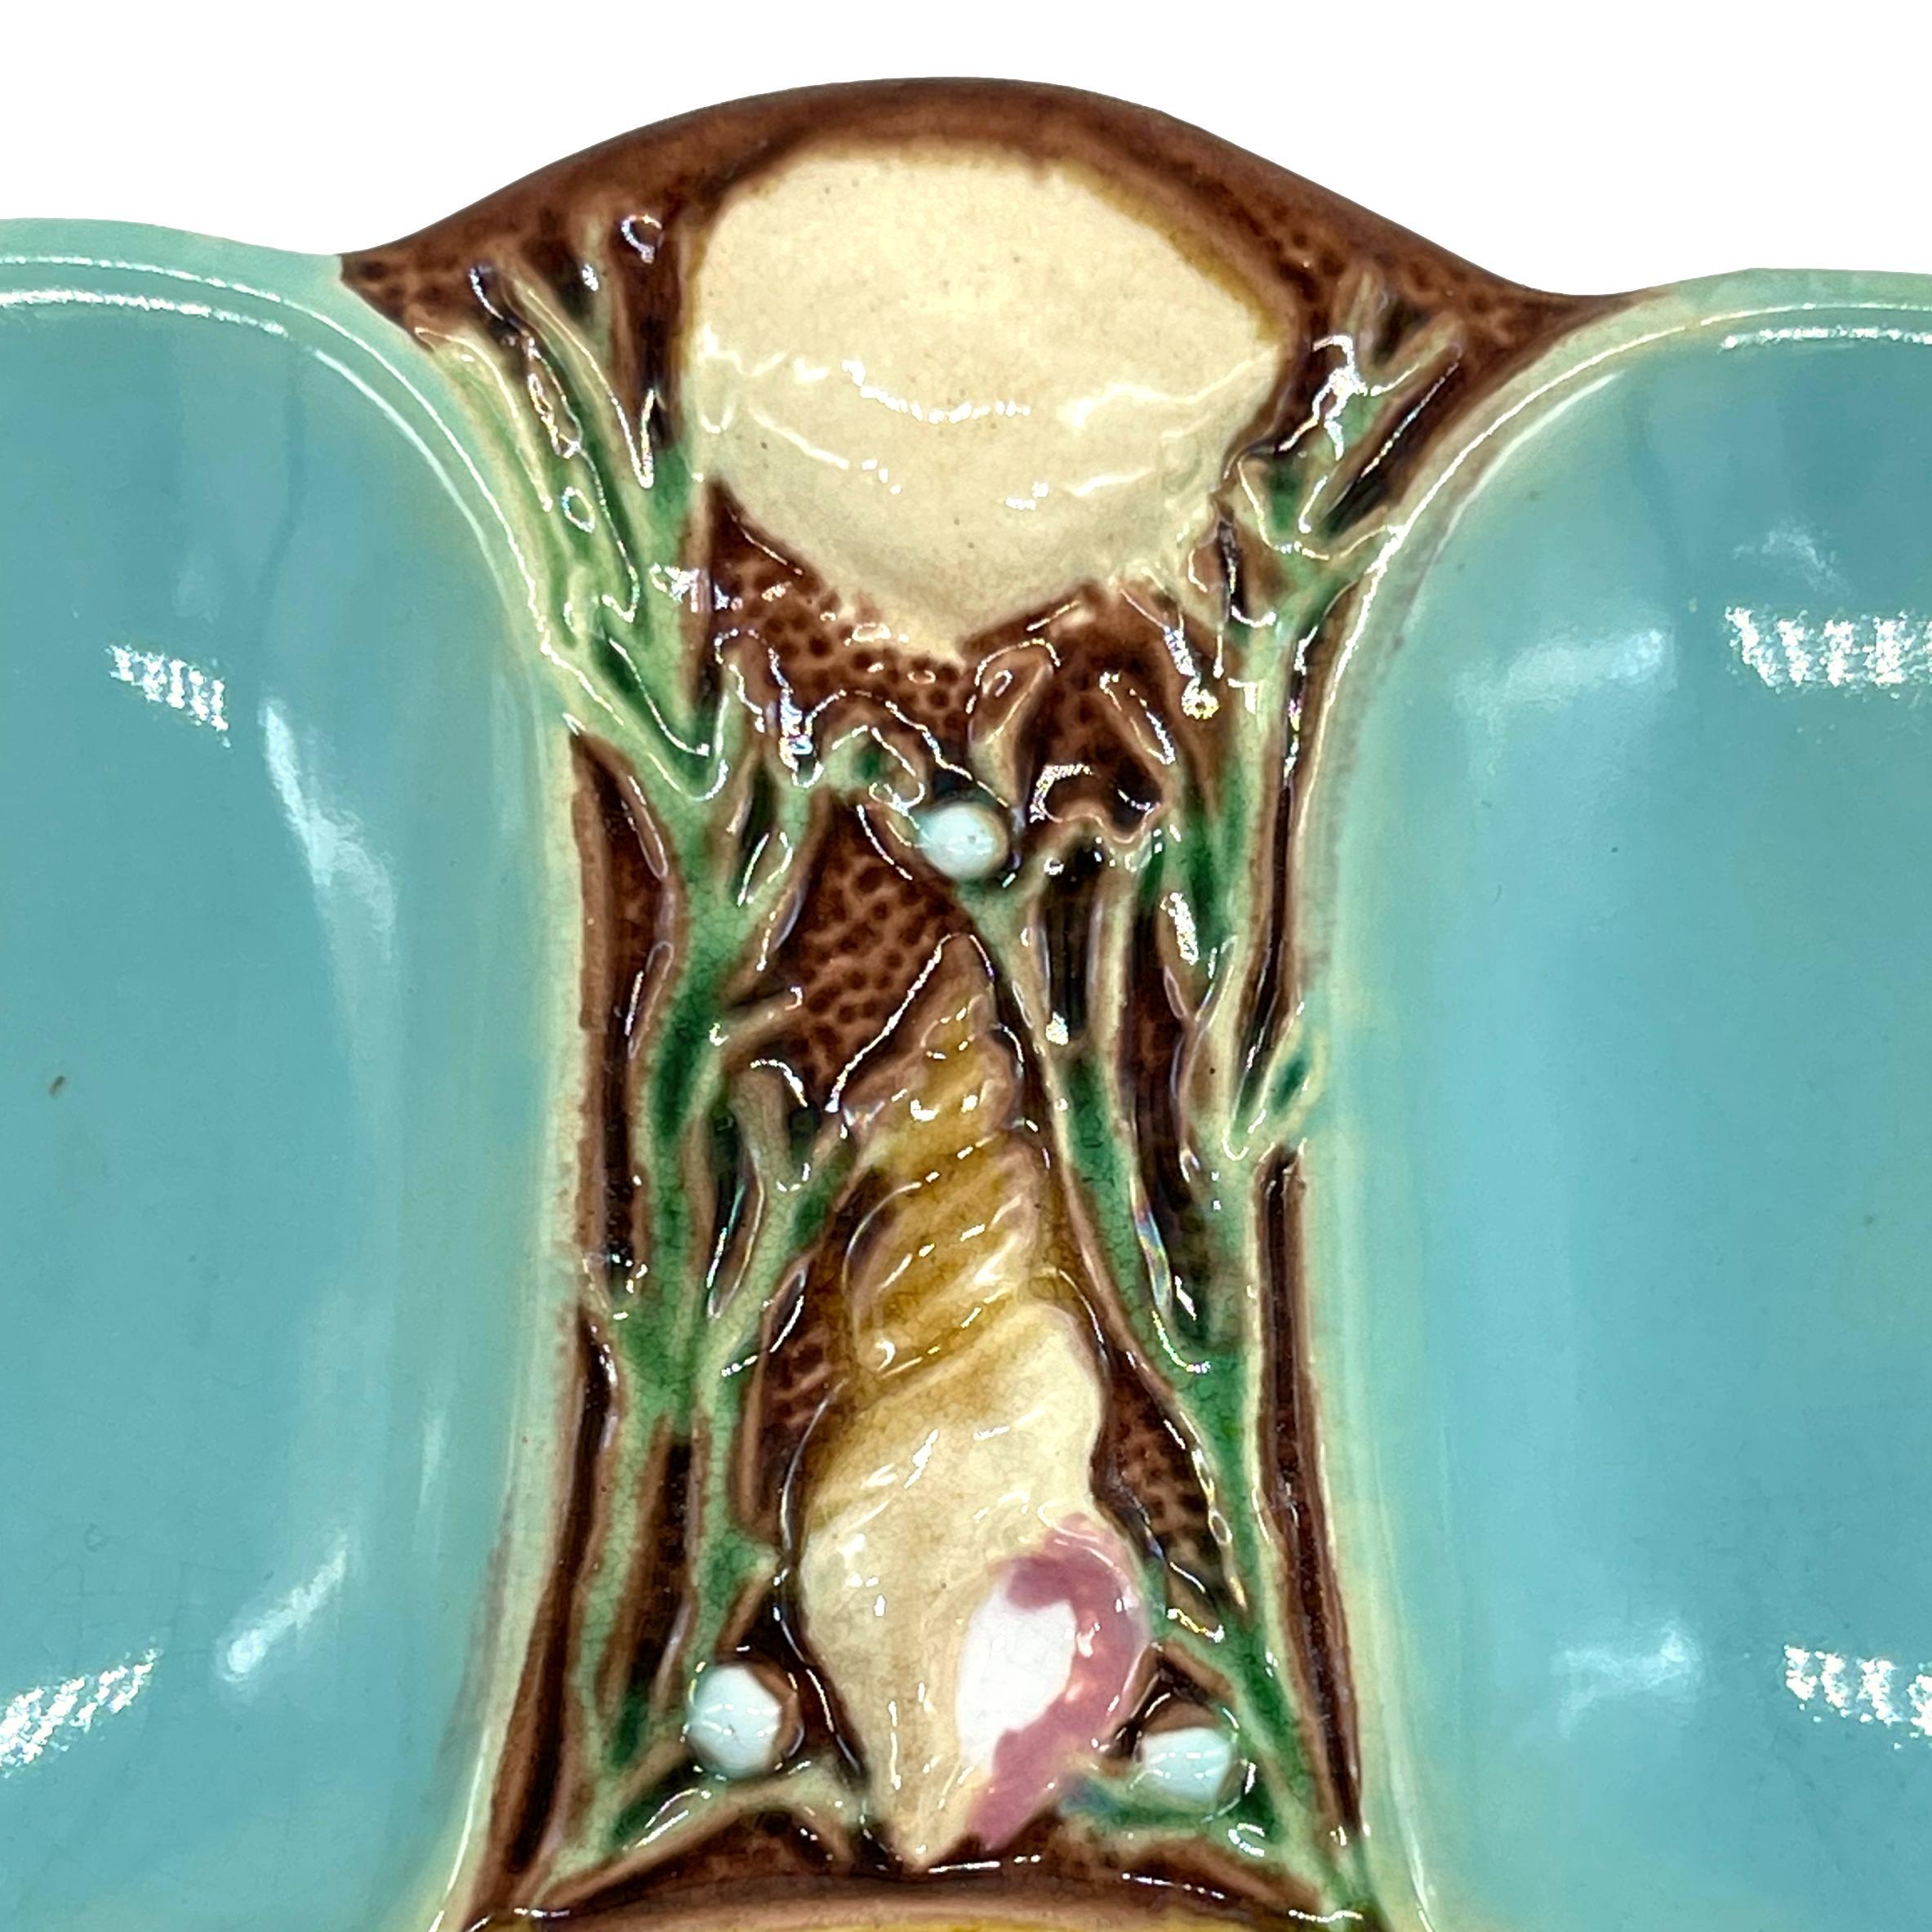 English Minton Majolica Turquoise-Ground Oyster Plate, Shells and Seaweed, Dated 1873